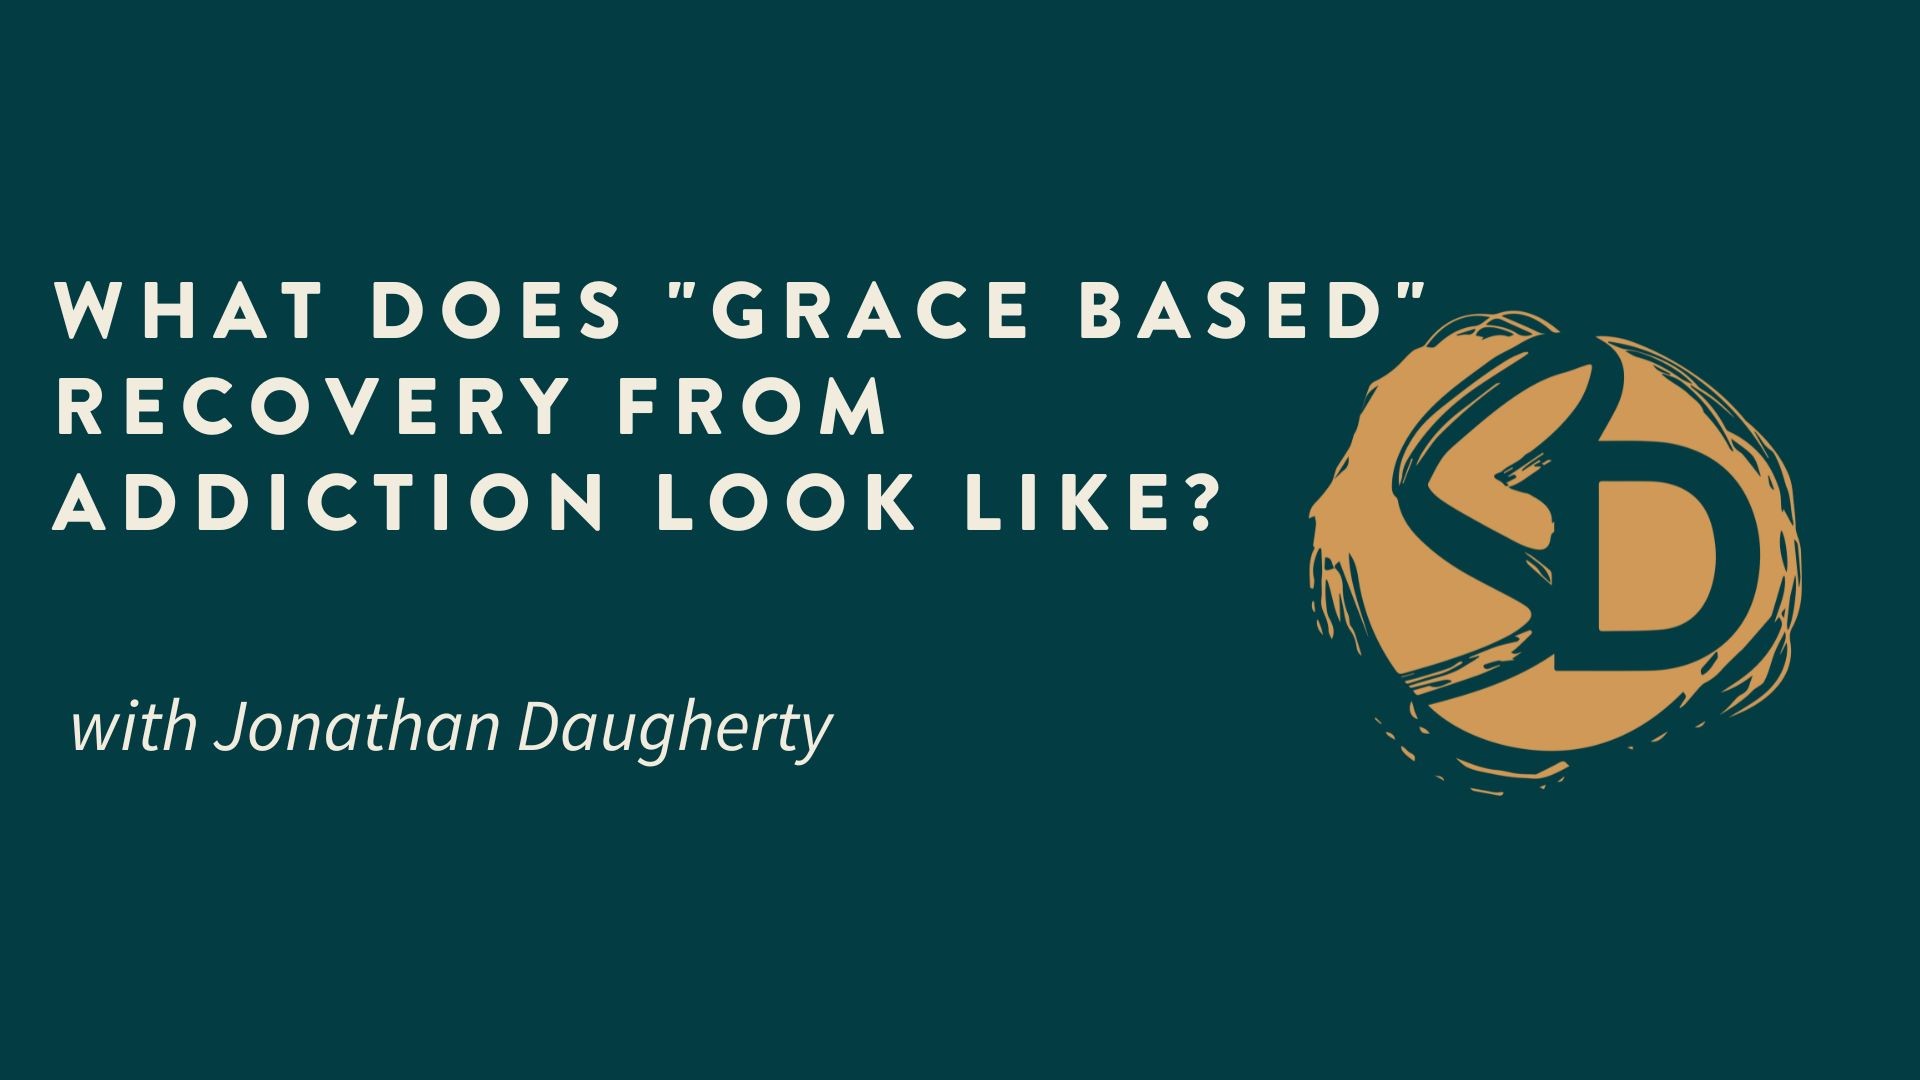 What Does “Grace Based Recovery” Look Like?